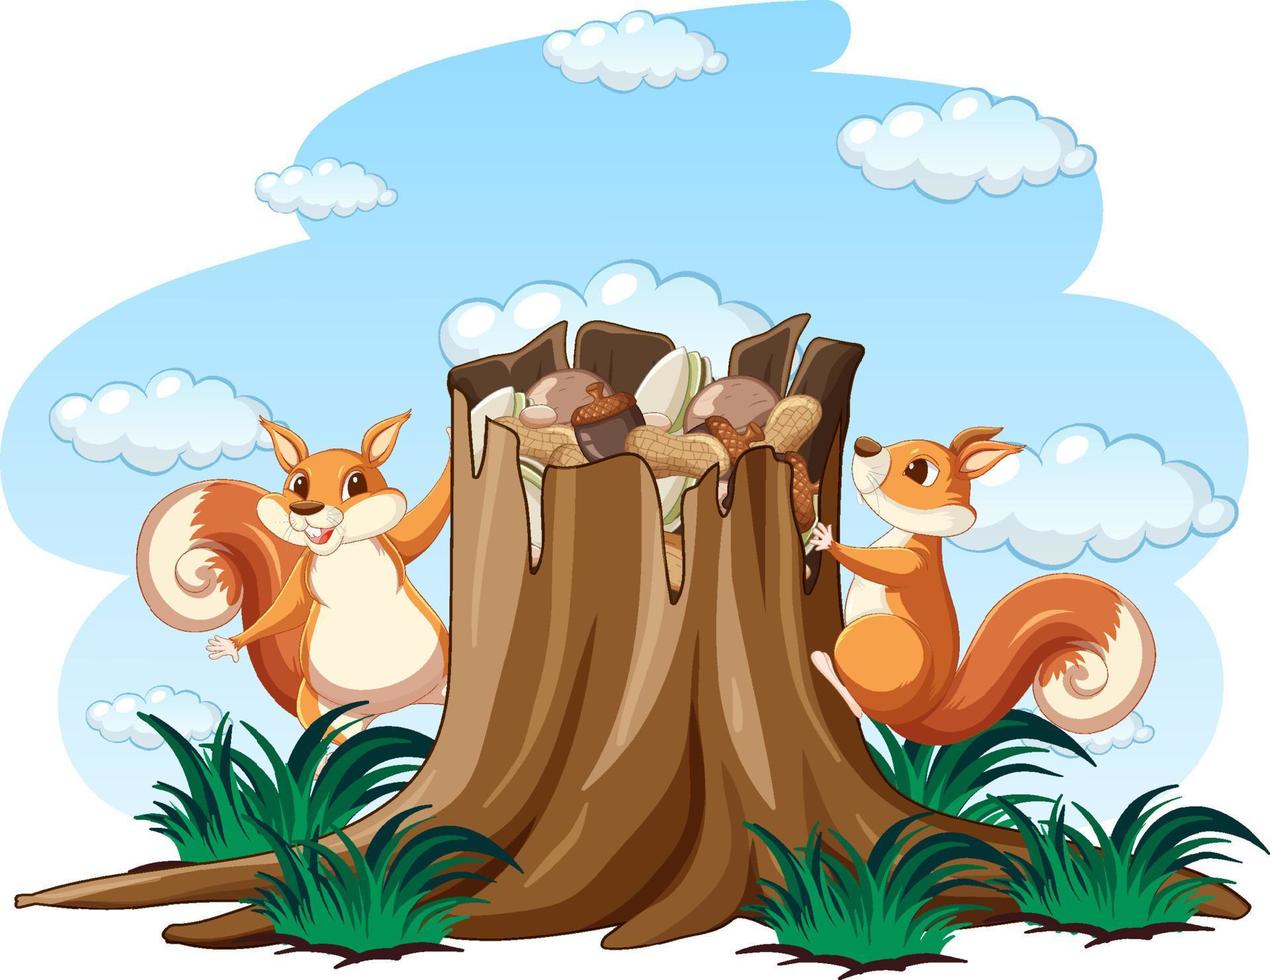 Two squirrels and nuts in the garden vector